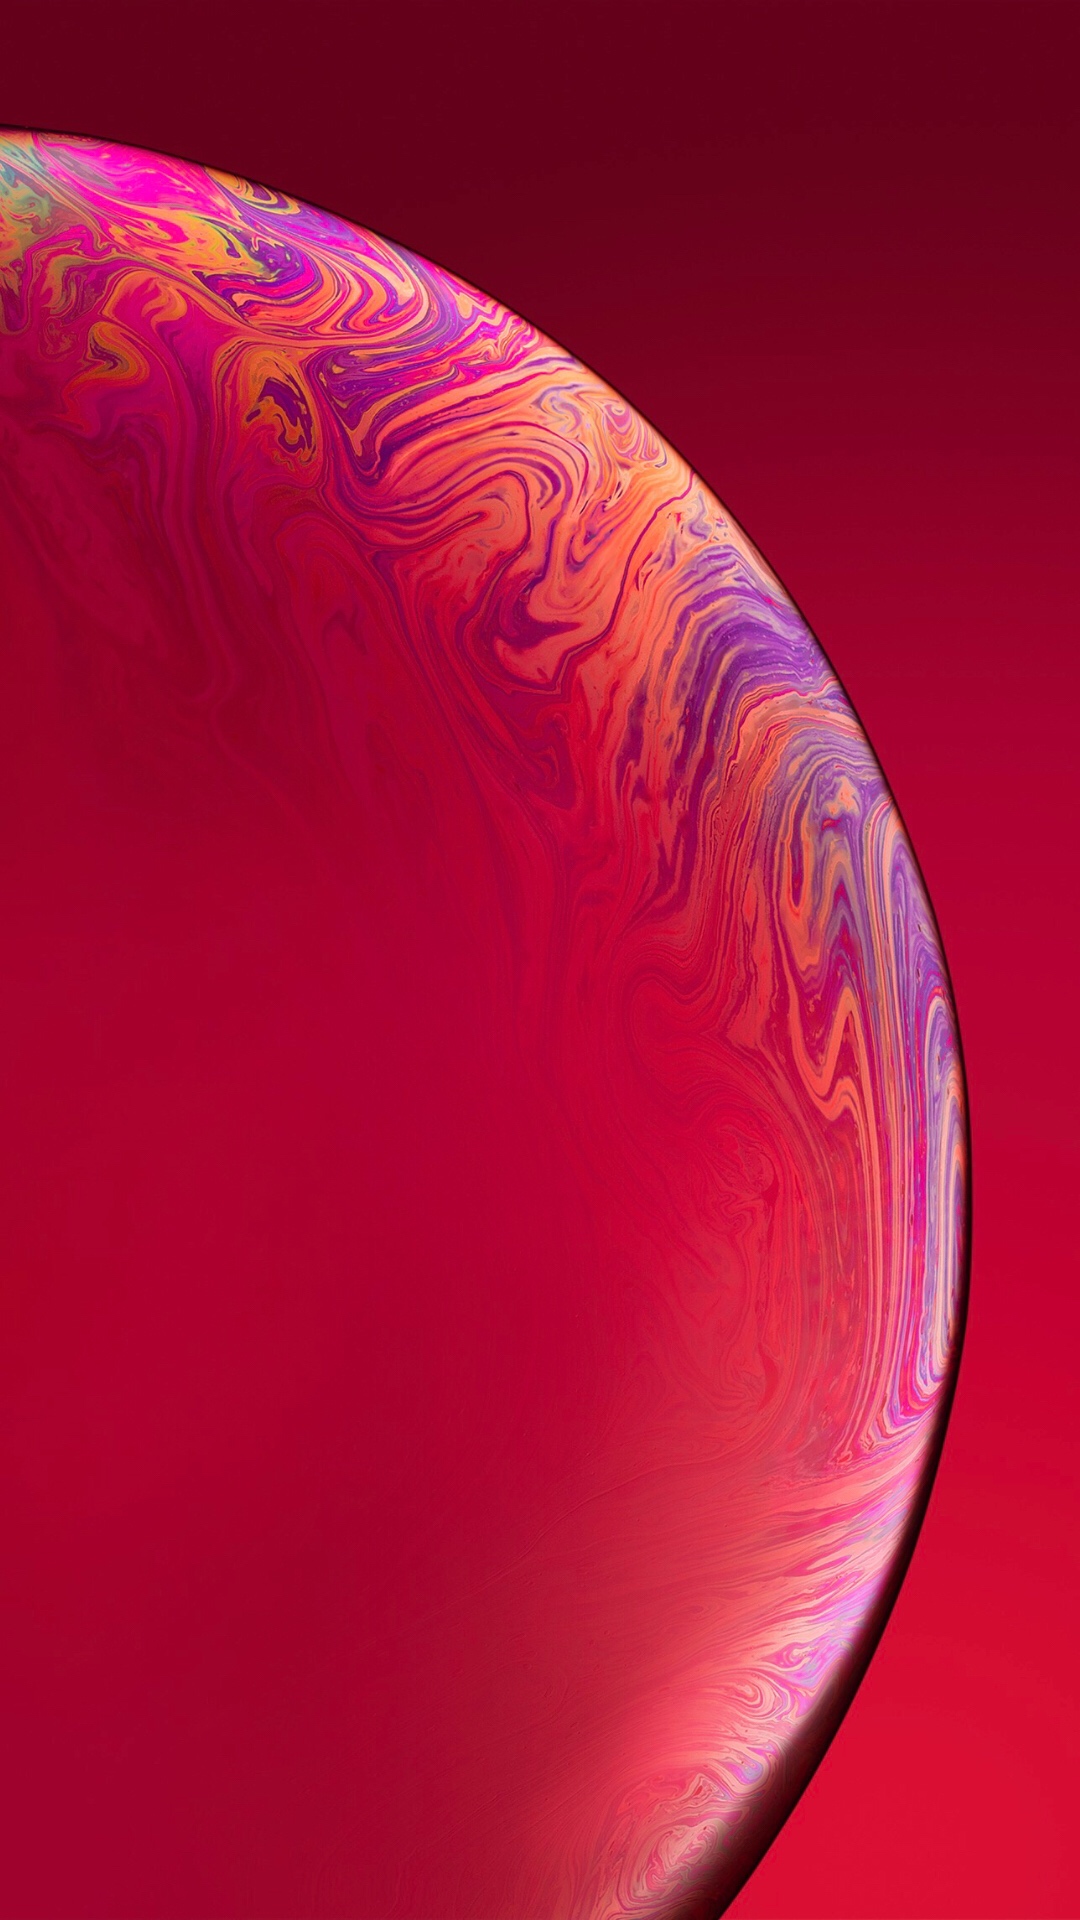 Exclusive download iphone xr wallpapers other iphone wallpapers â